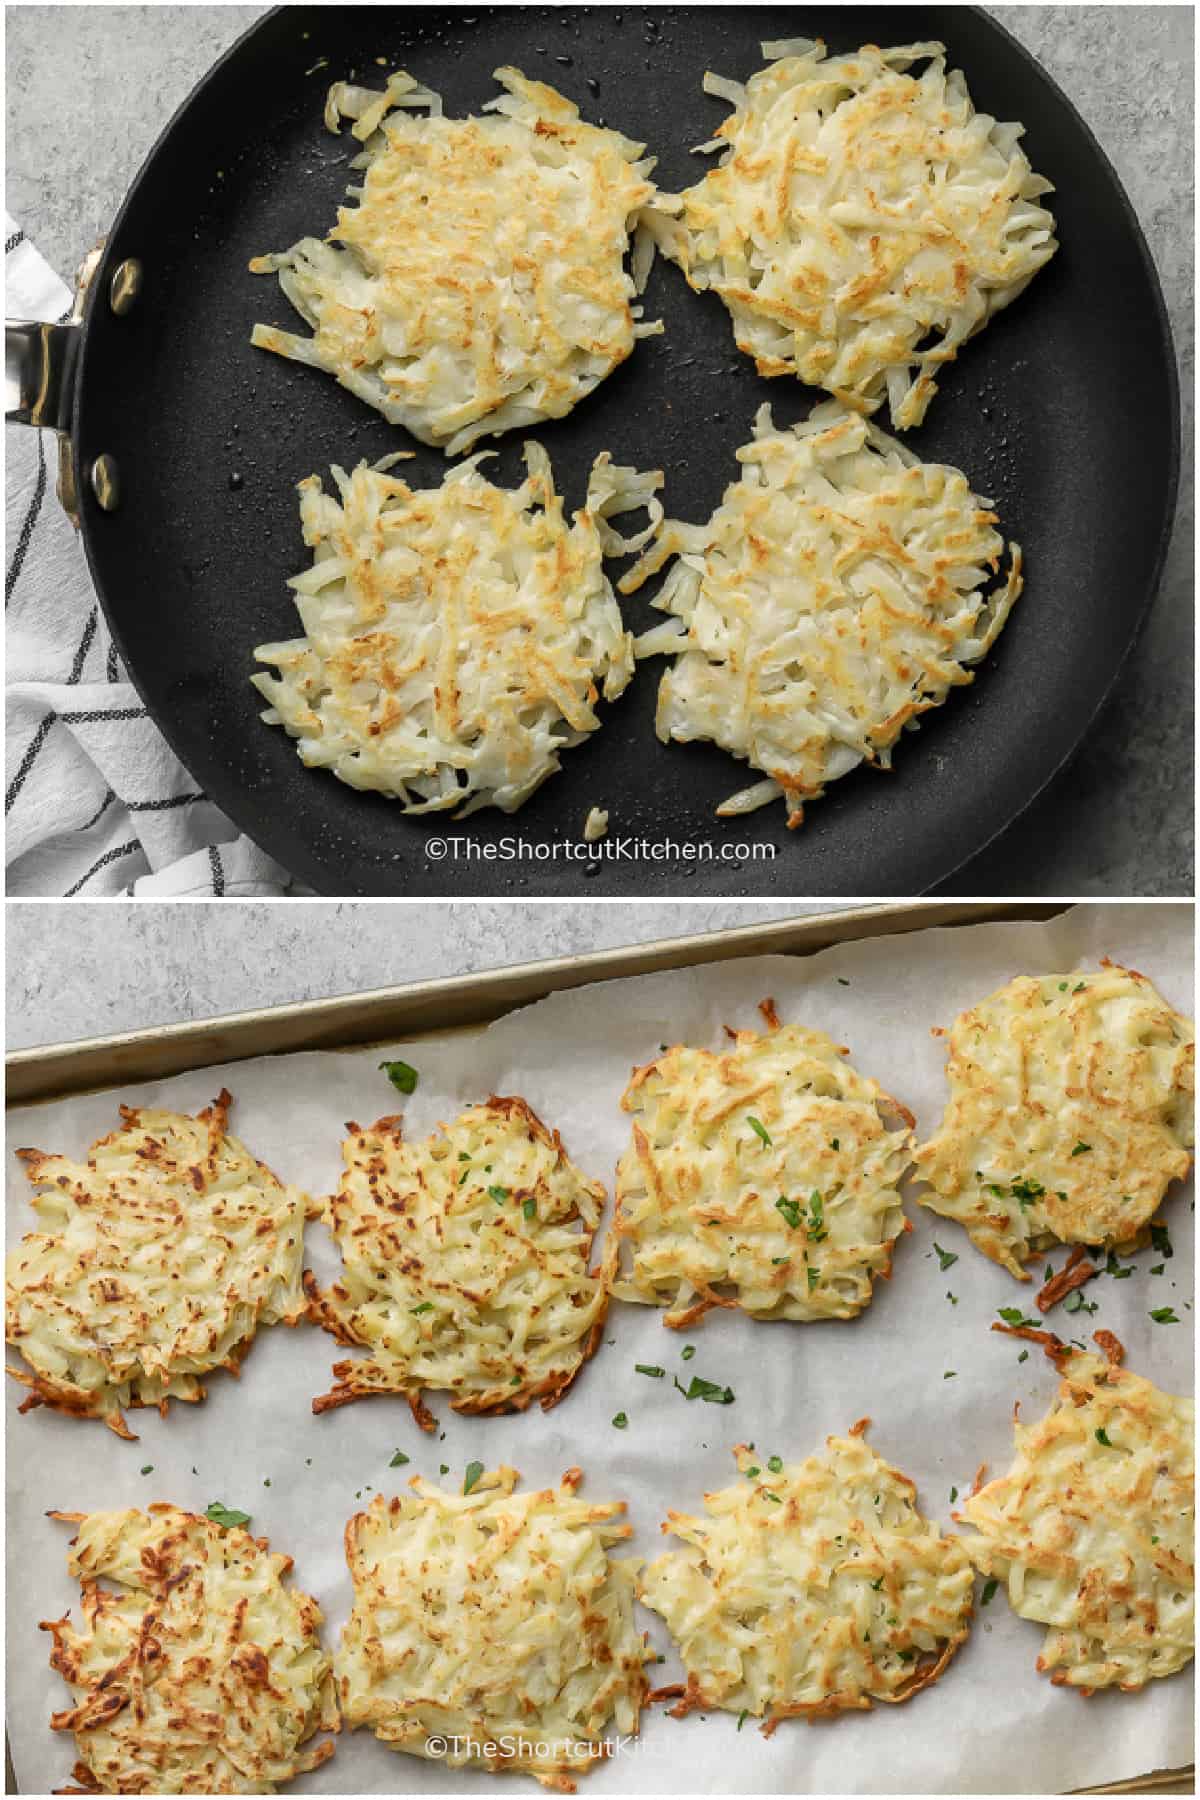 homemade hash brown patties cooking in a fry pan, and set on a parchment lined cookie sheet